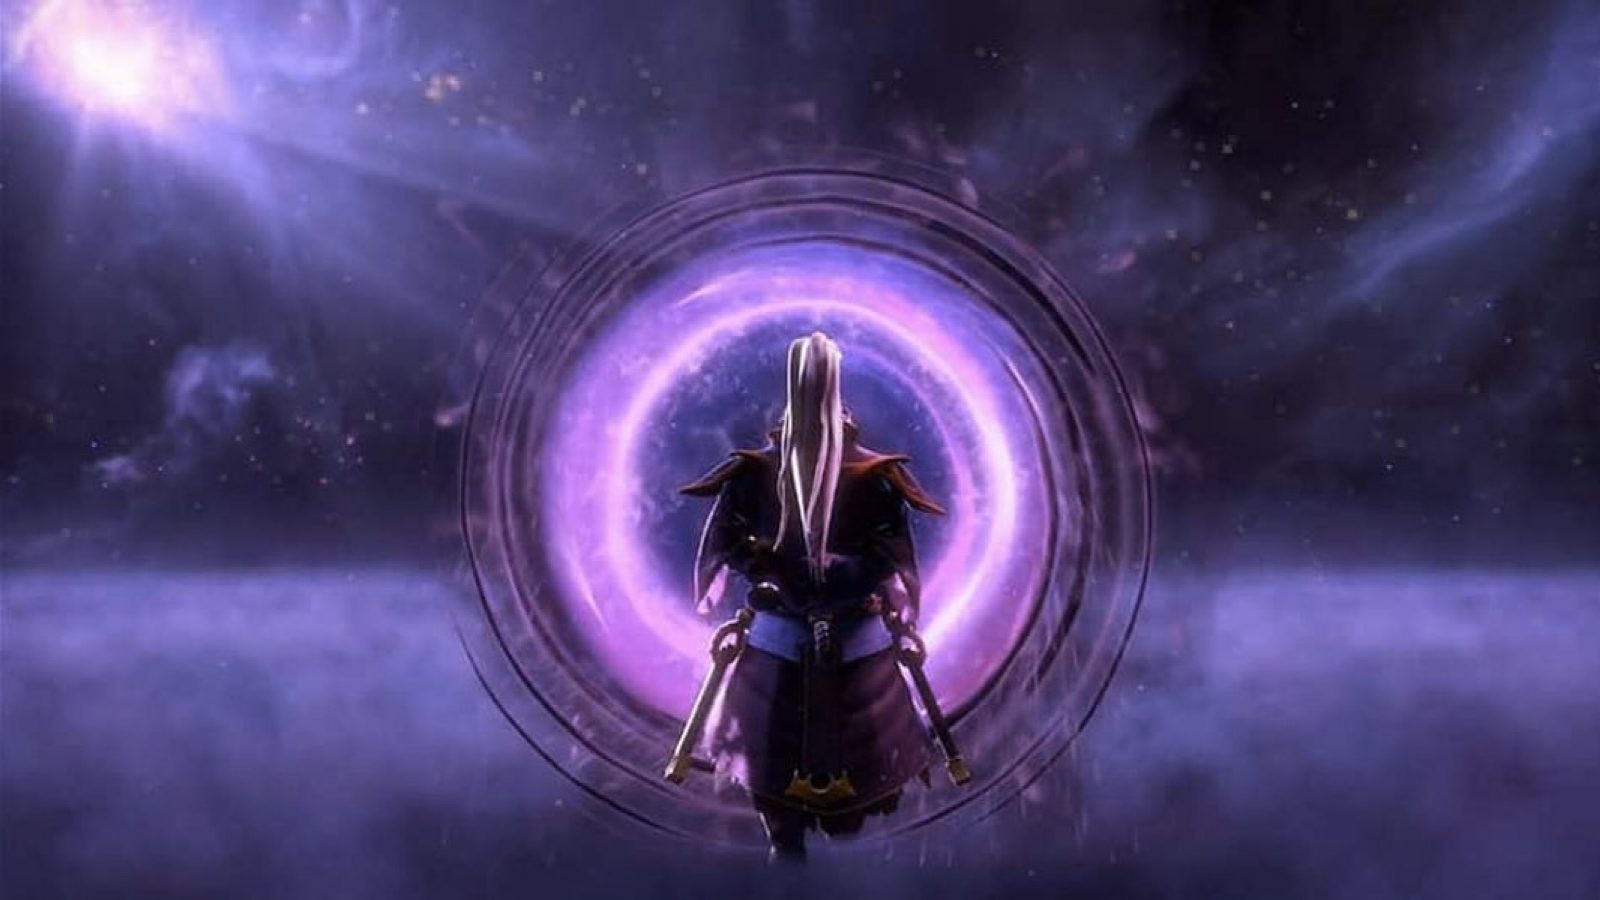 Dota 2 Is Getting New Heroes, One Is An Epic Grandma With A Shotgun And She Brought Cookies